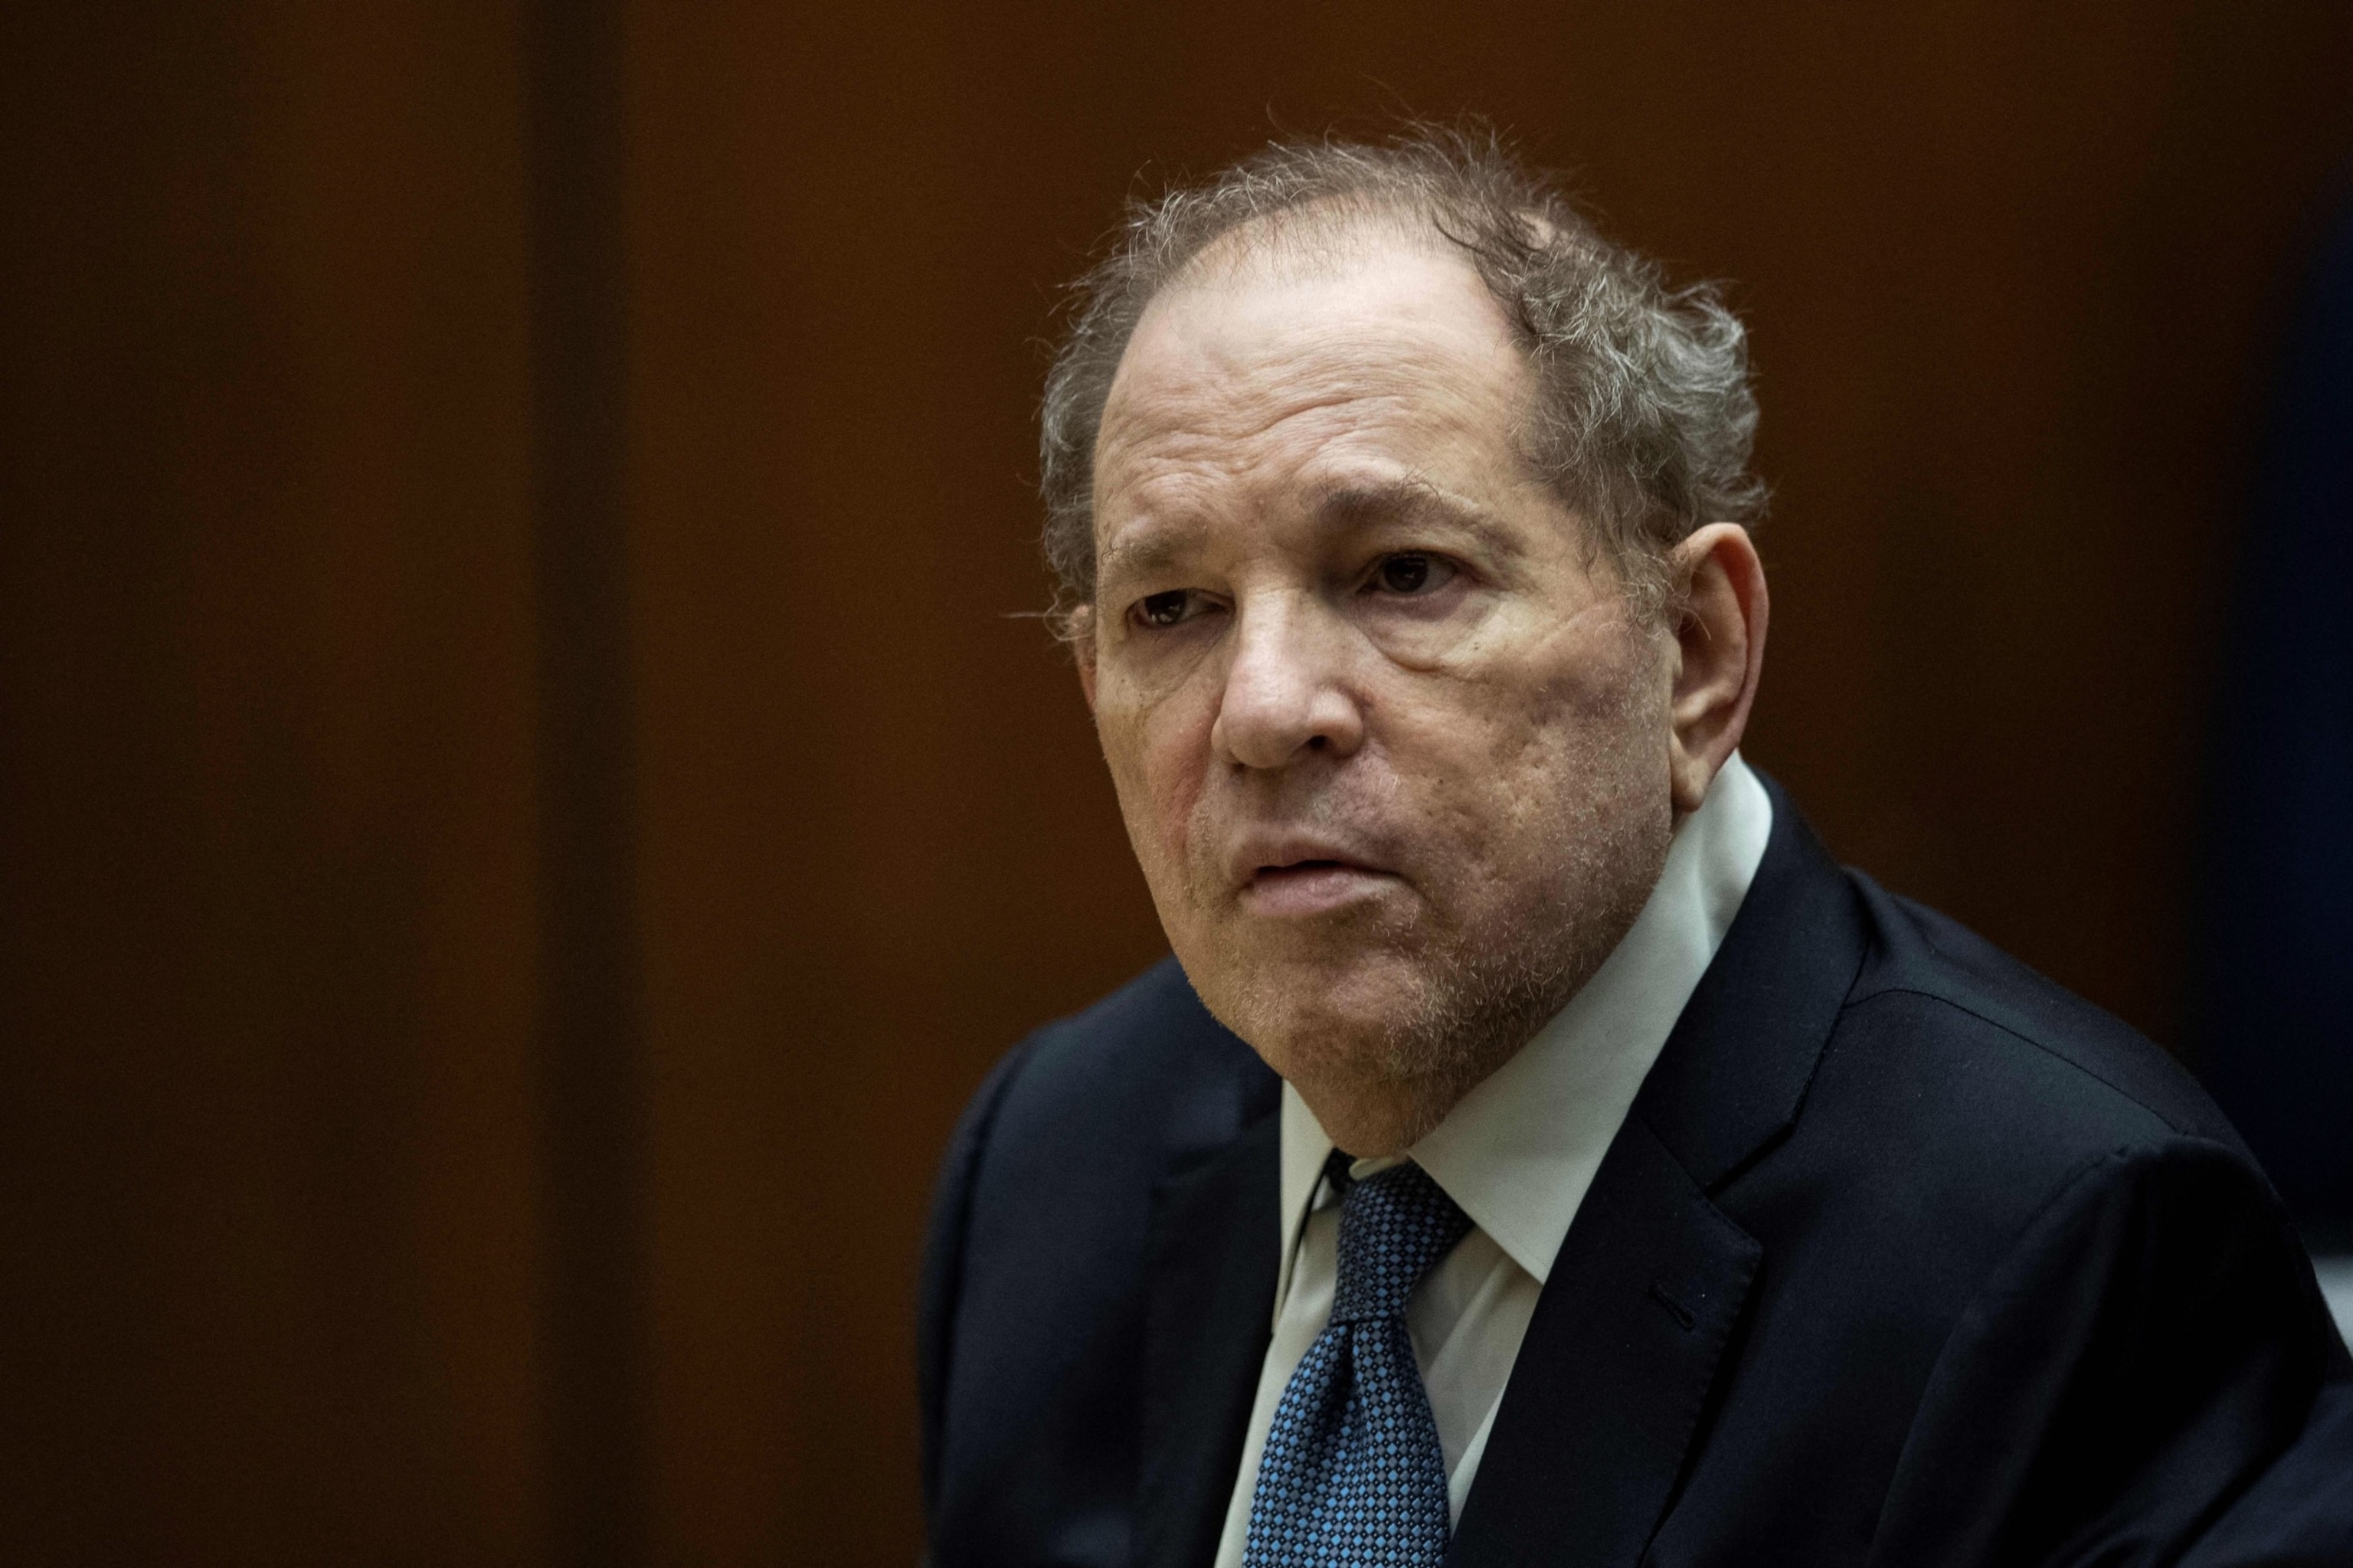 PHOTO: Former film producer Harvey Weinstein appears in court at the Clara Shortridge Foltz Criminal Justice Center in Los Angeles, California, on 04 October 2022.